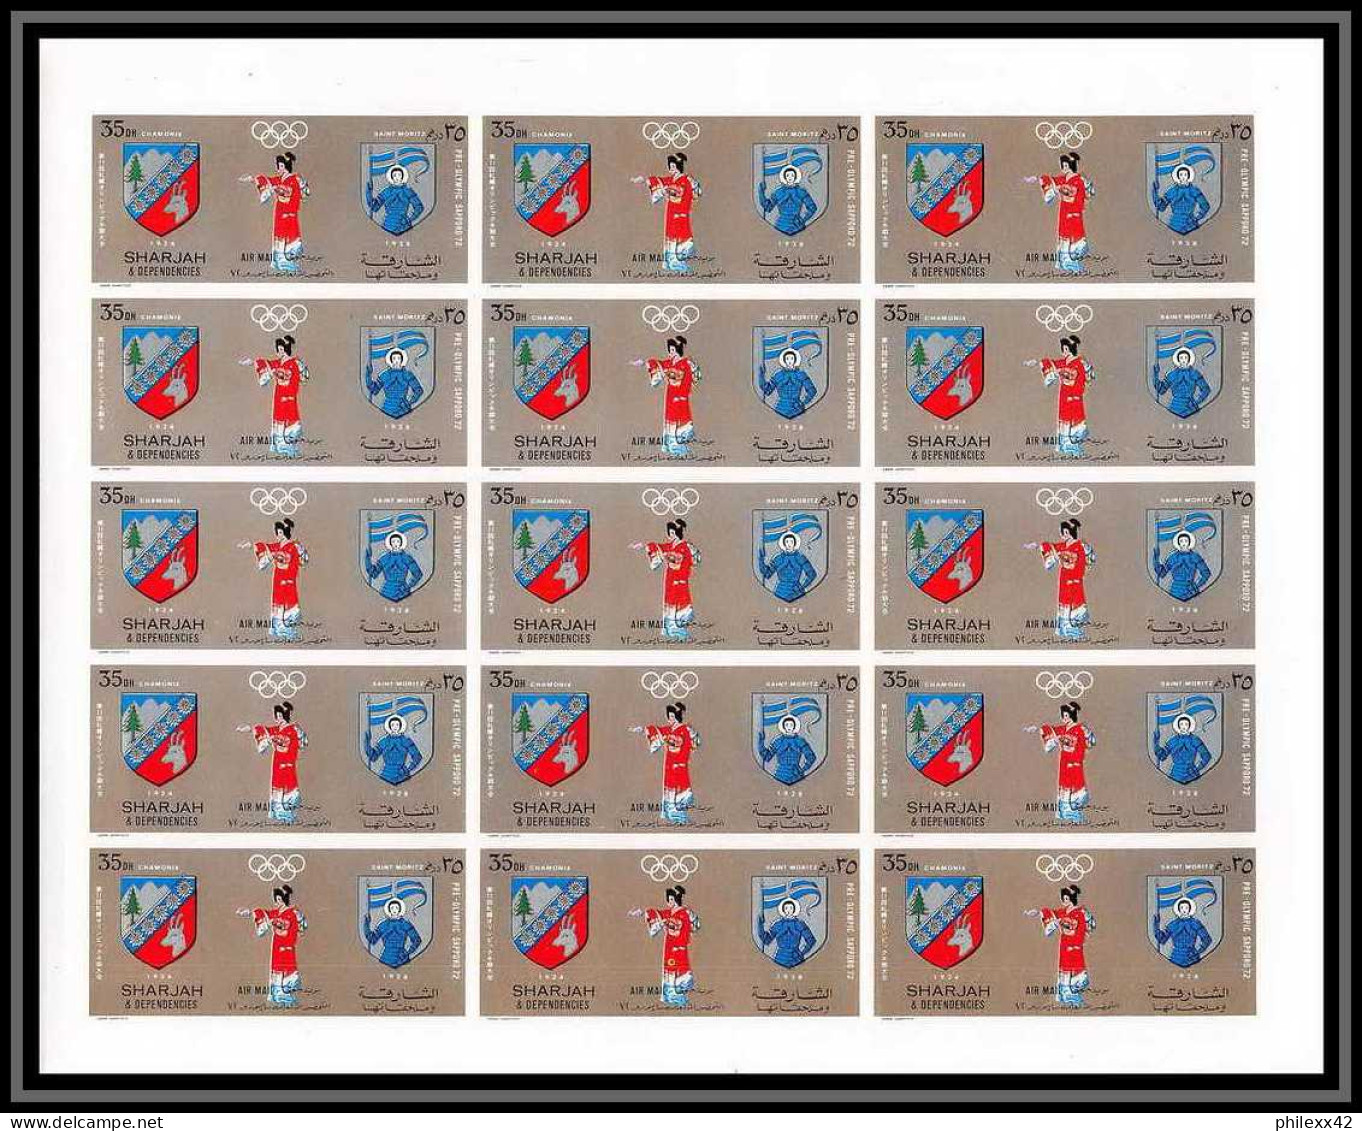 100c Sharjah MNH ** N° 825 / 834 B non dentelé (Imperf) jeux olympiques (olympic games) sapporo 72 feuilles sheets